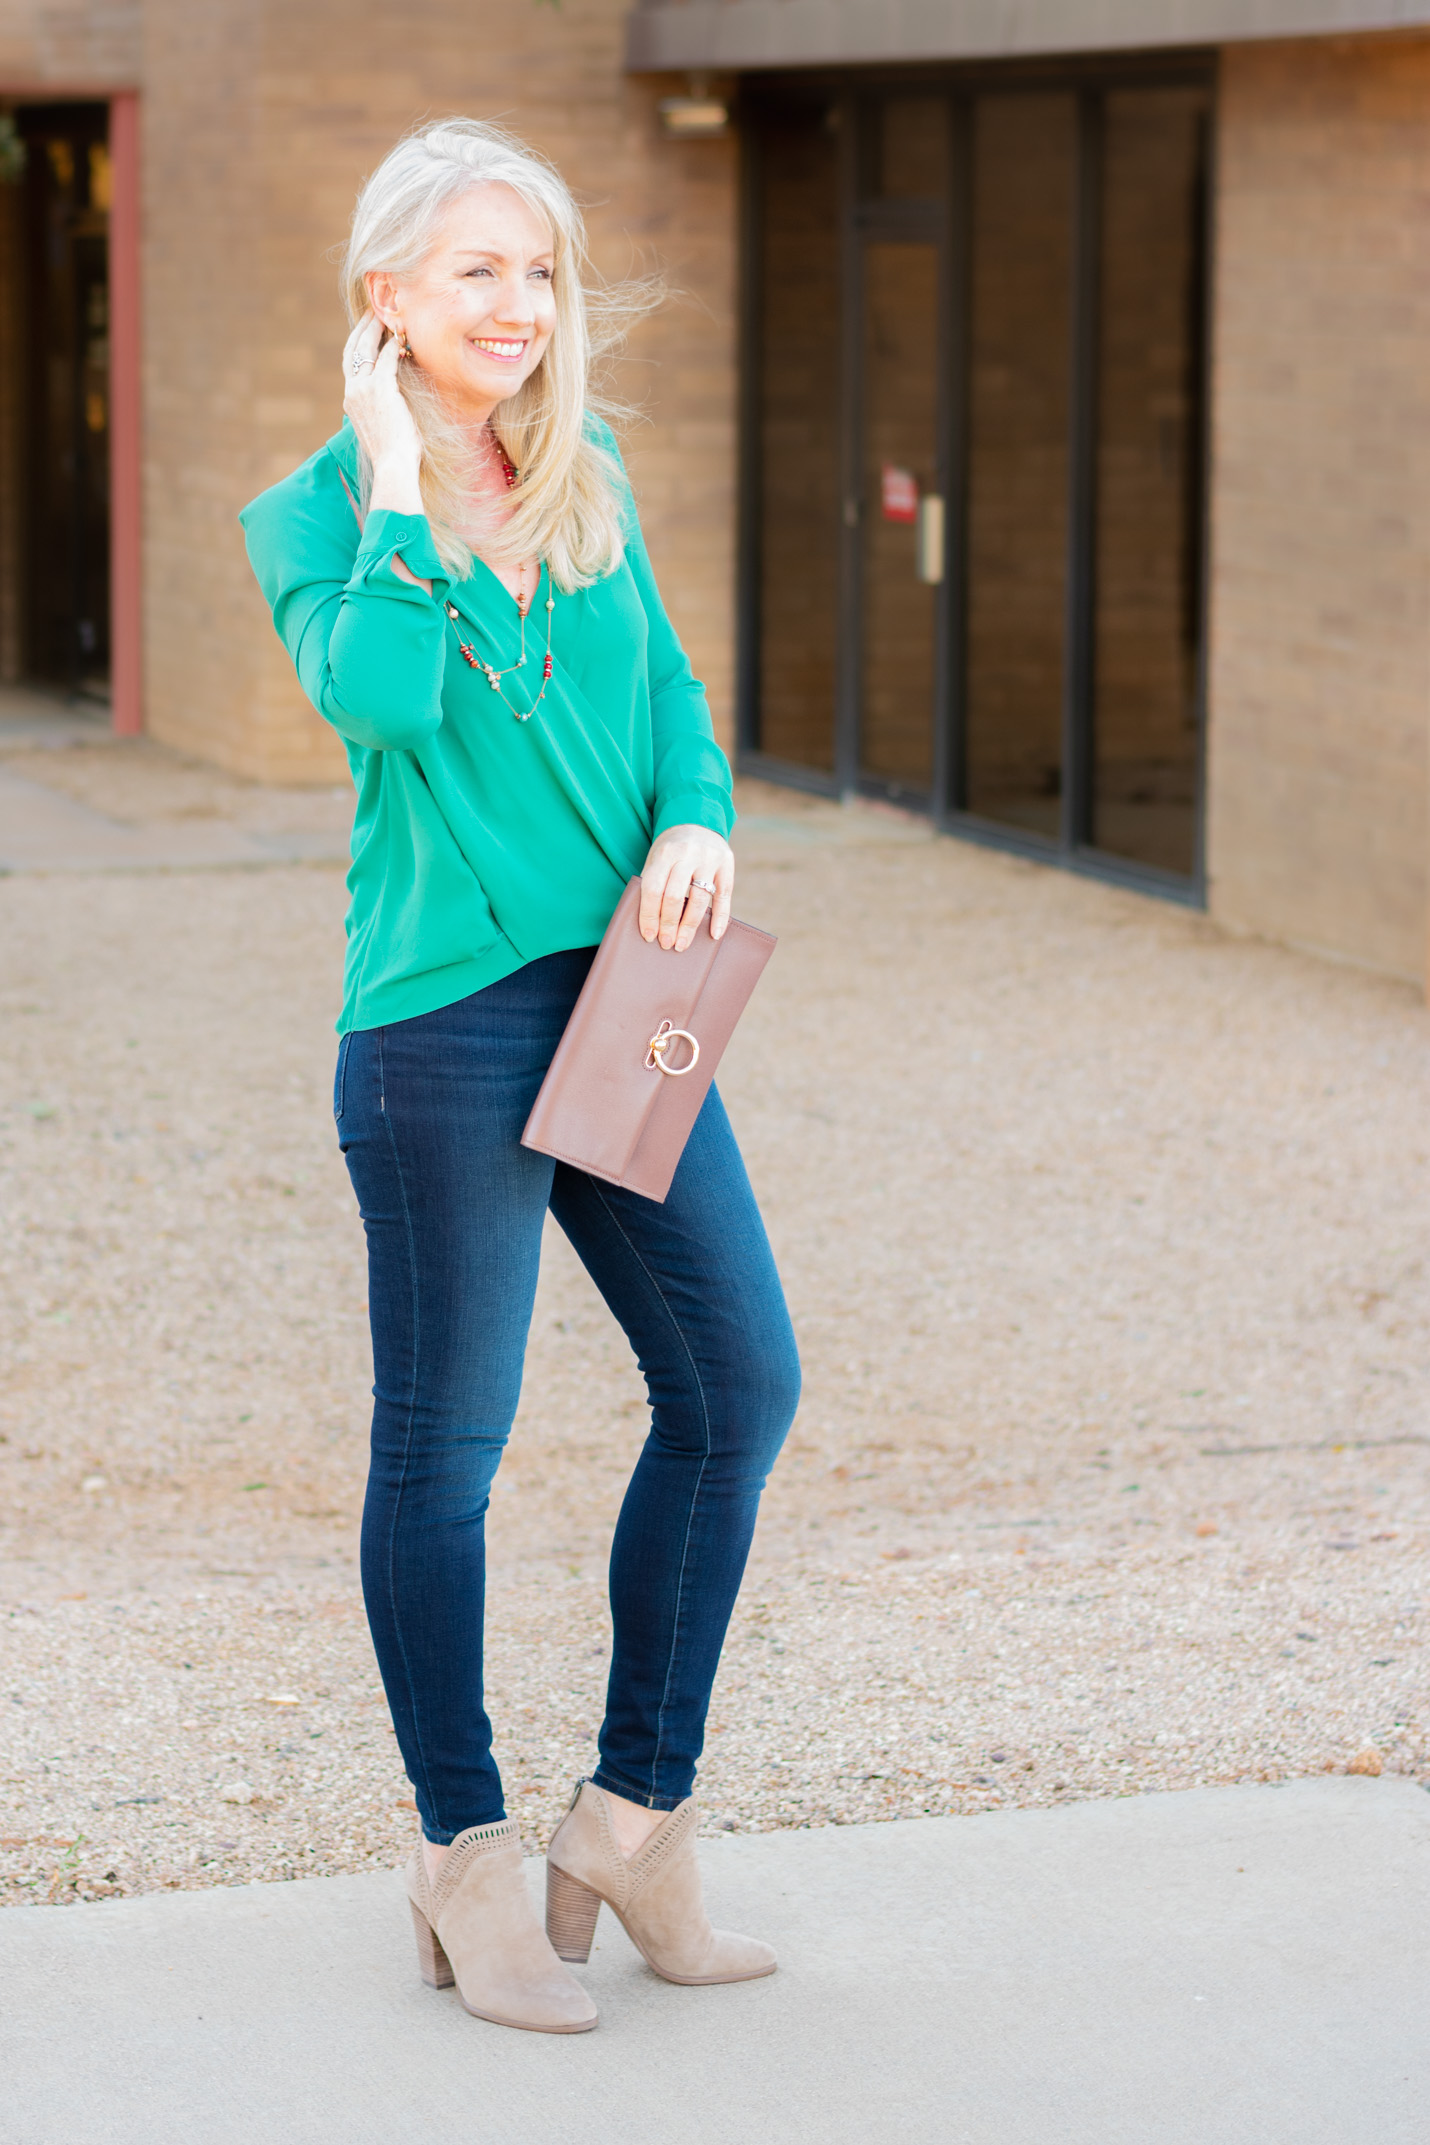 Cutout Surplice Top + Skinny Jeans for casual date night